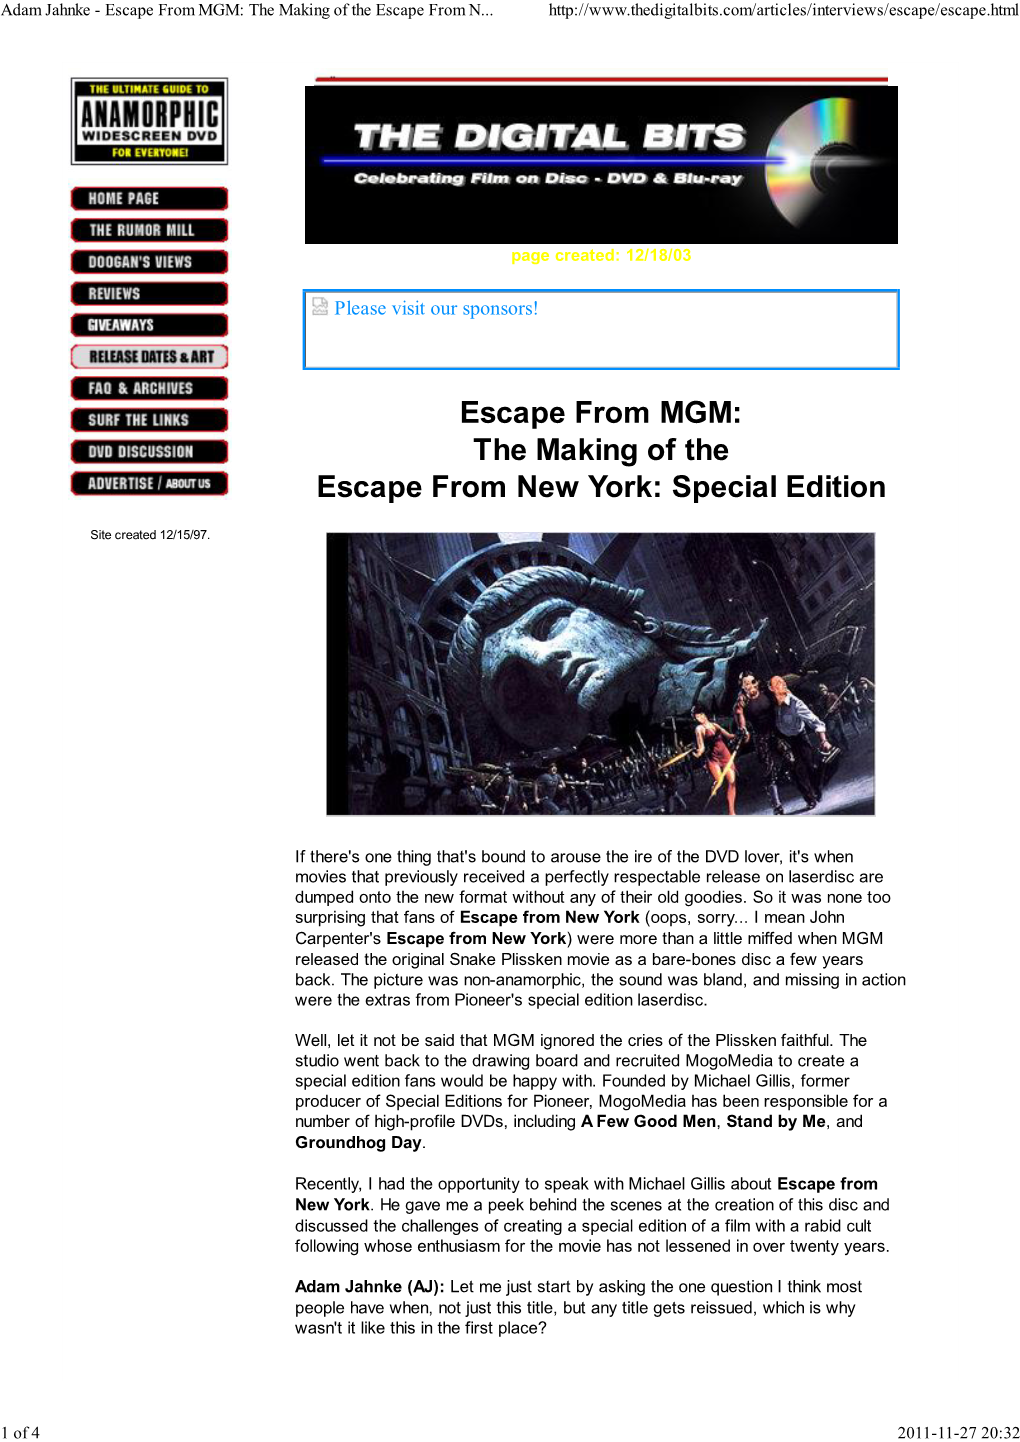 Escape from MGM: the Making of the Escape from N